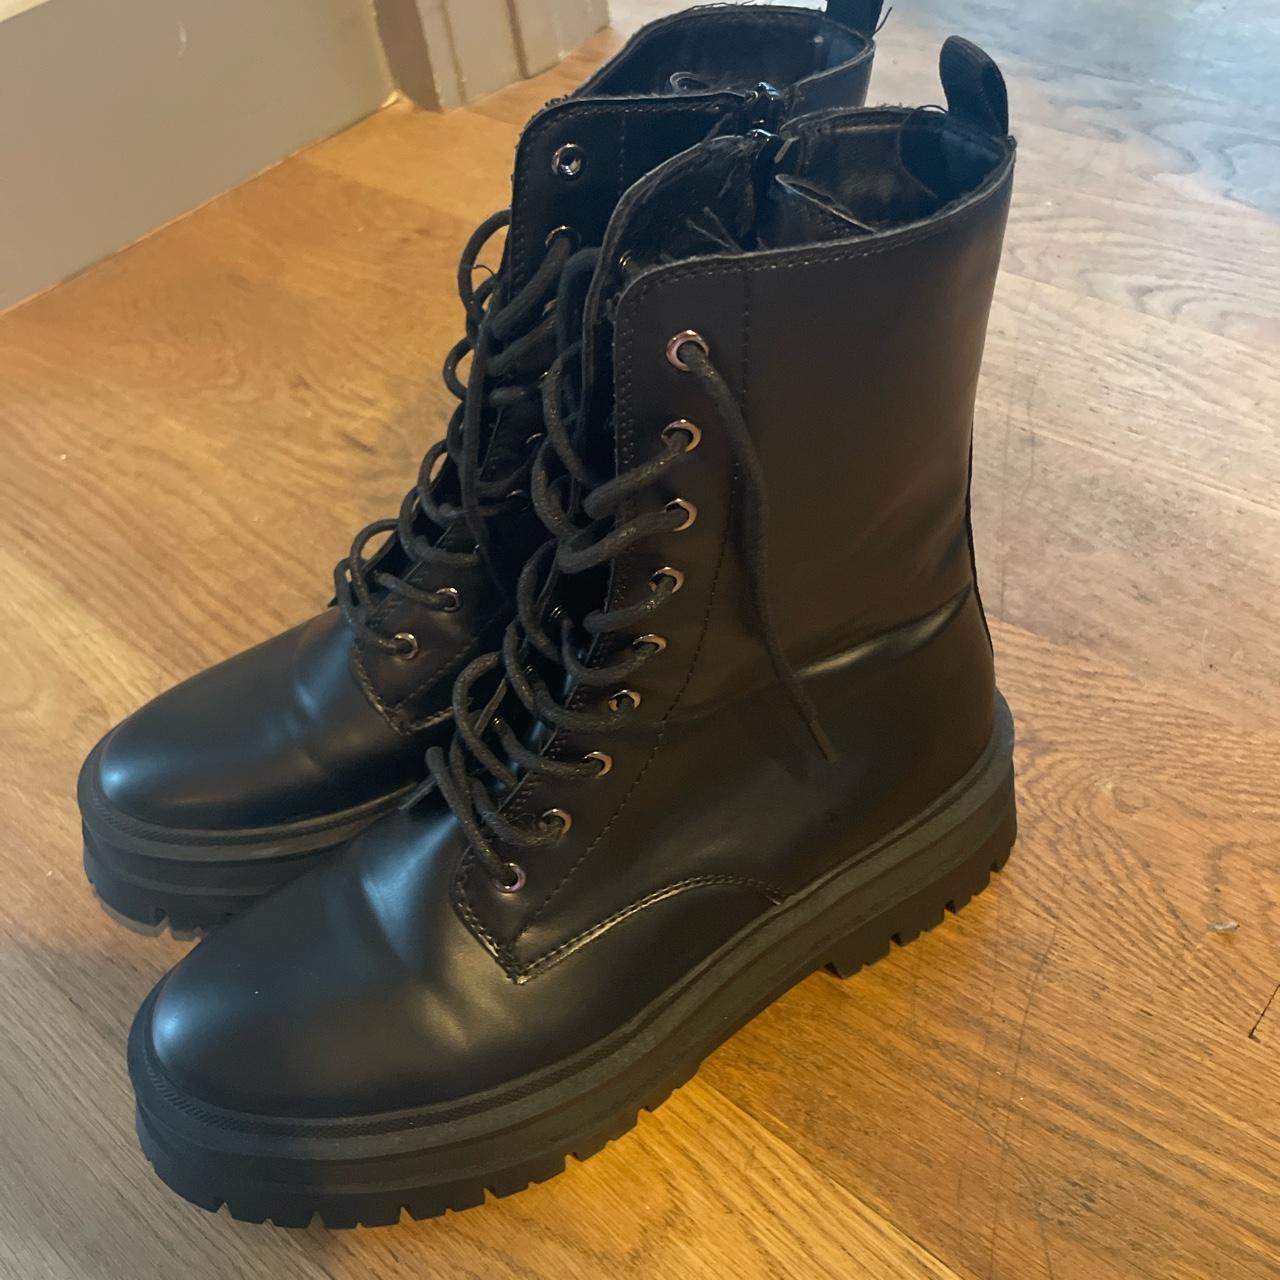 Black Lace-up Goth Chunky Boots - Depop